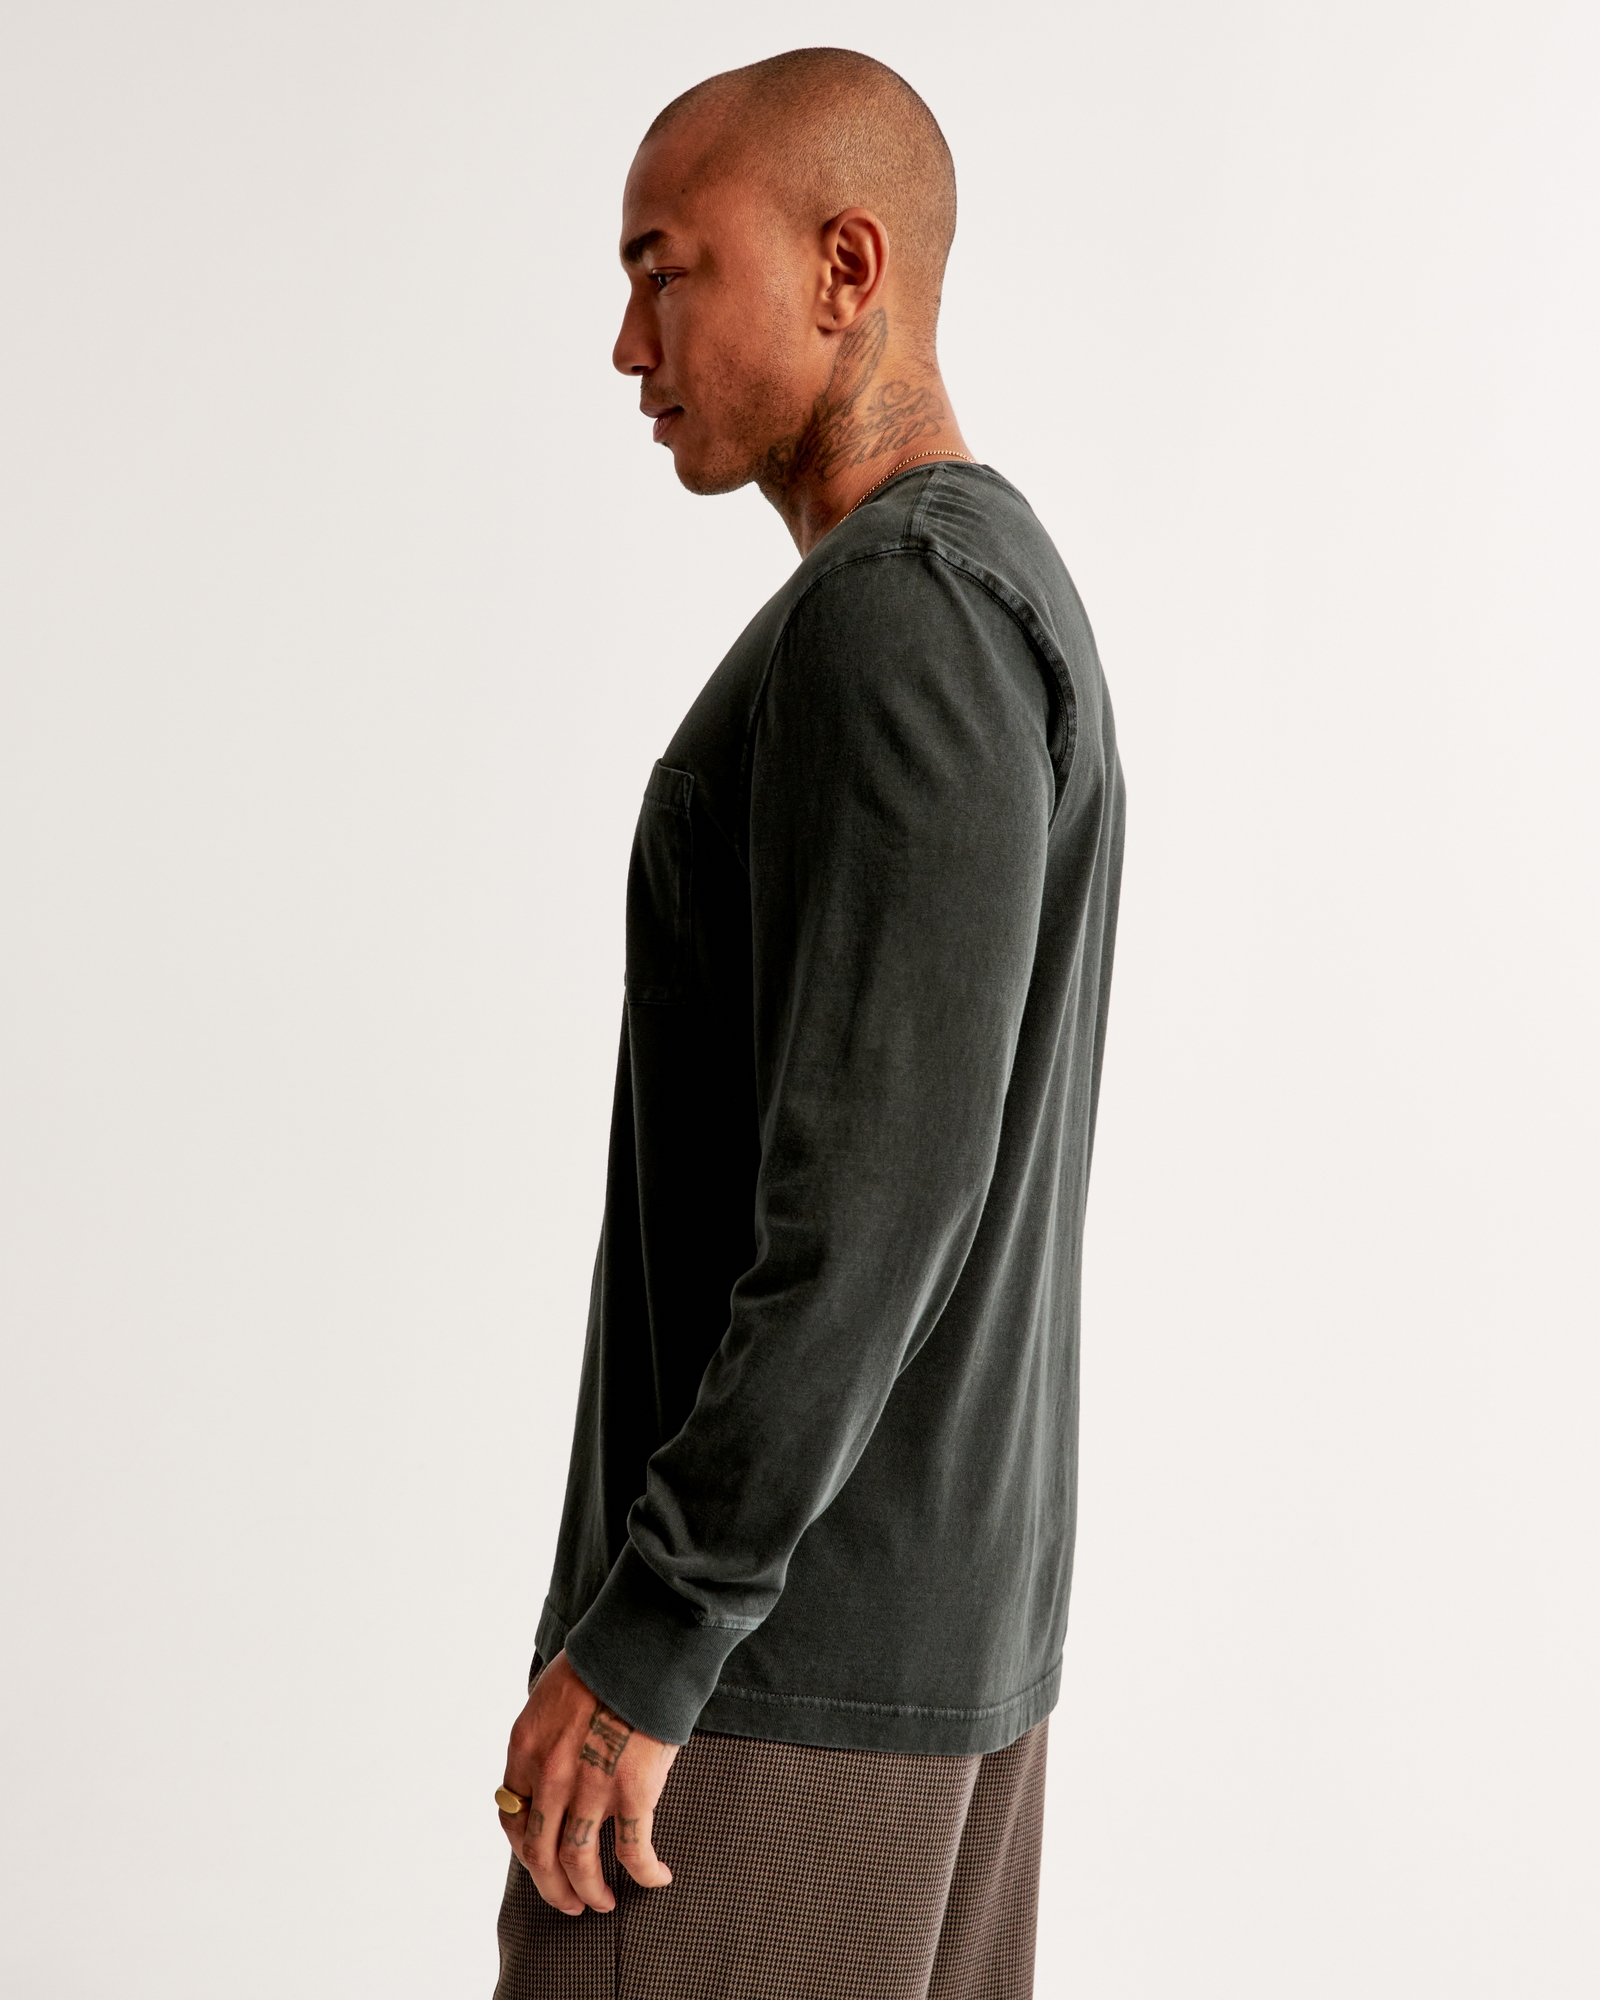 The Essentials Long Sleeve Tee in Palmetto by Over Under Clothing